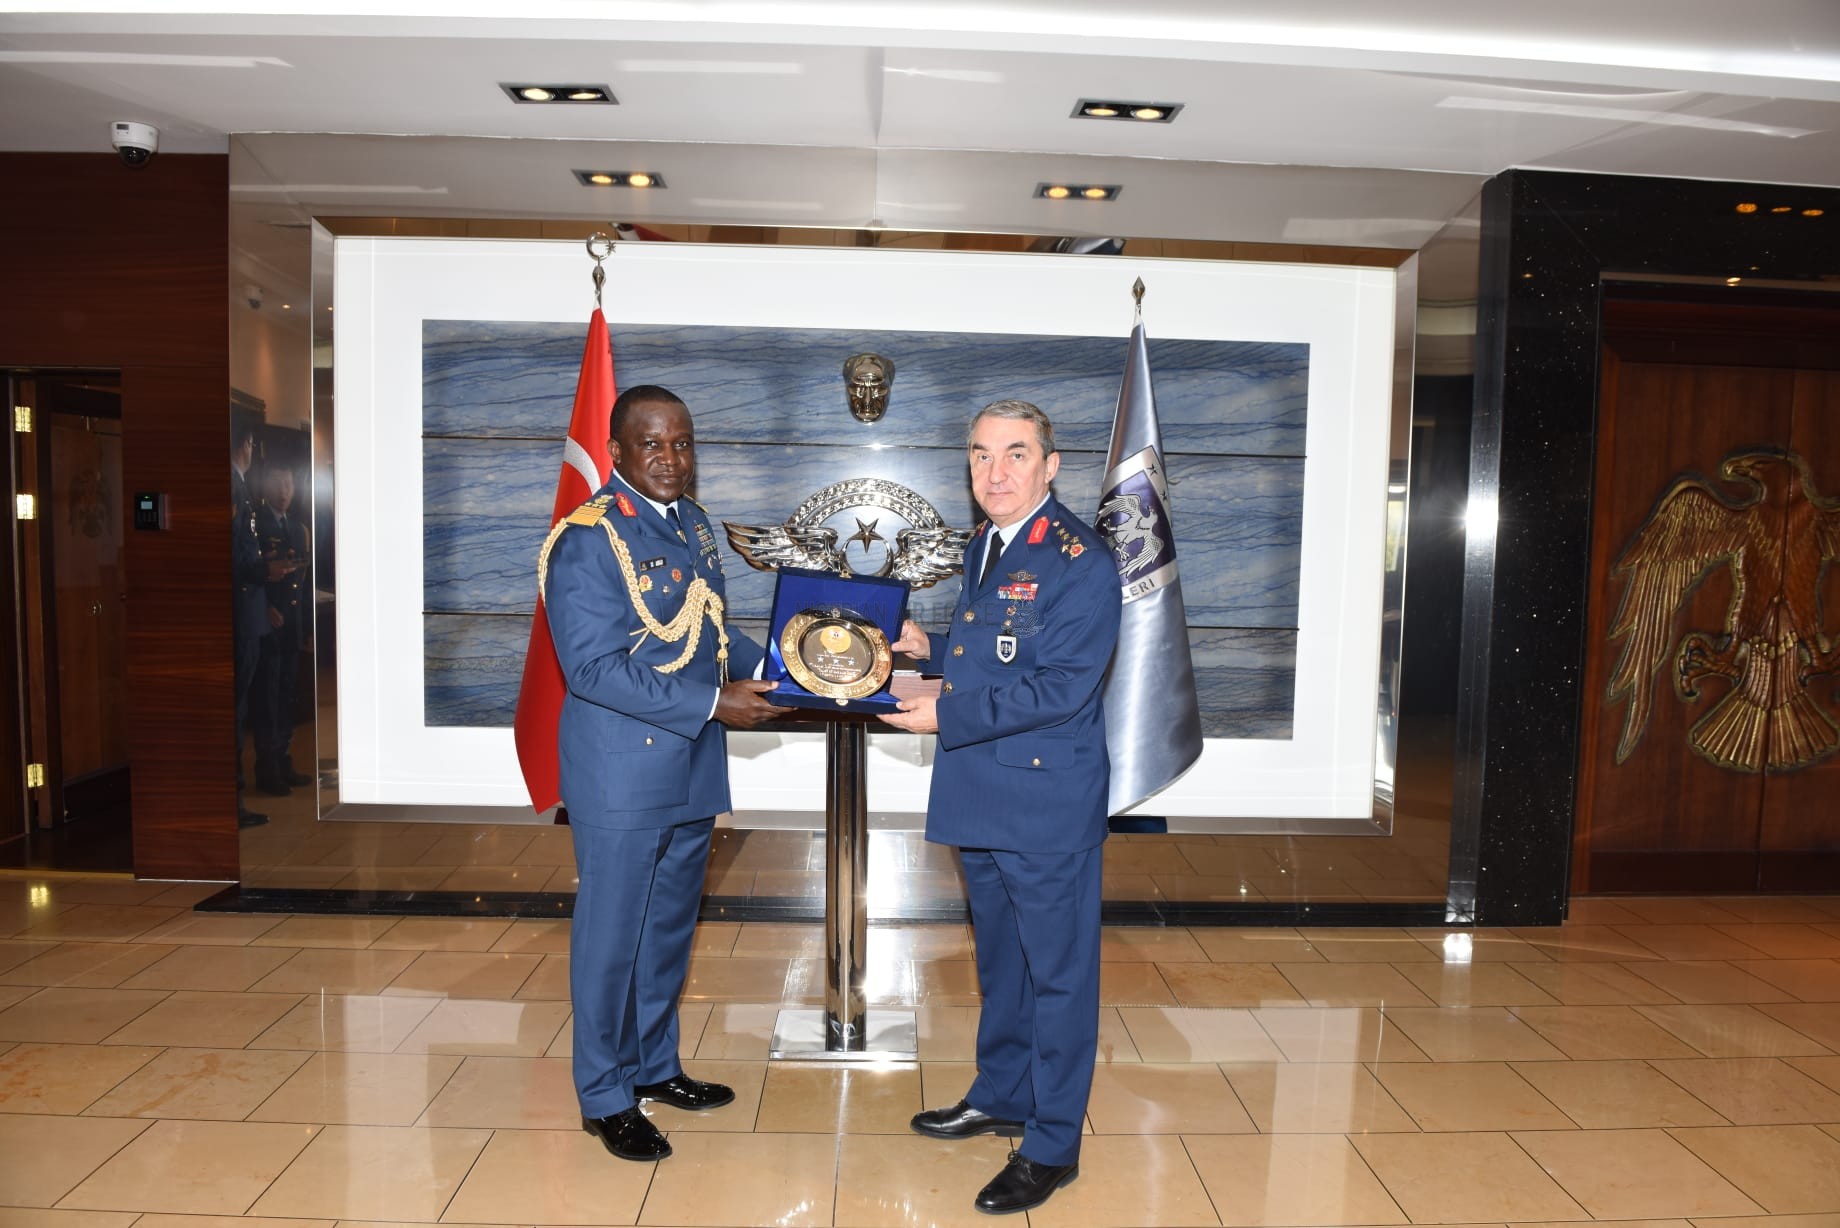 NAF SEEKS STRONG COLLABORATION WITH TURKISH AIR FORCE IN DEFENCE TECHNOLOGY, FIGHT AGAINST TERRORISM